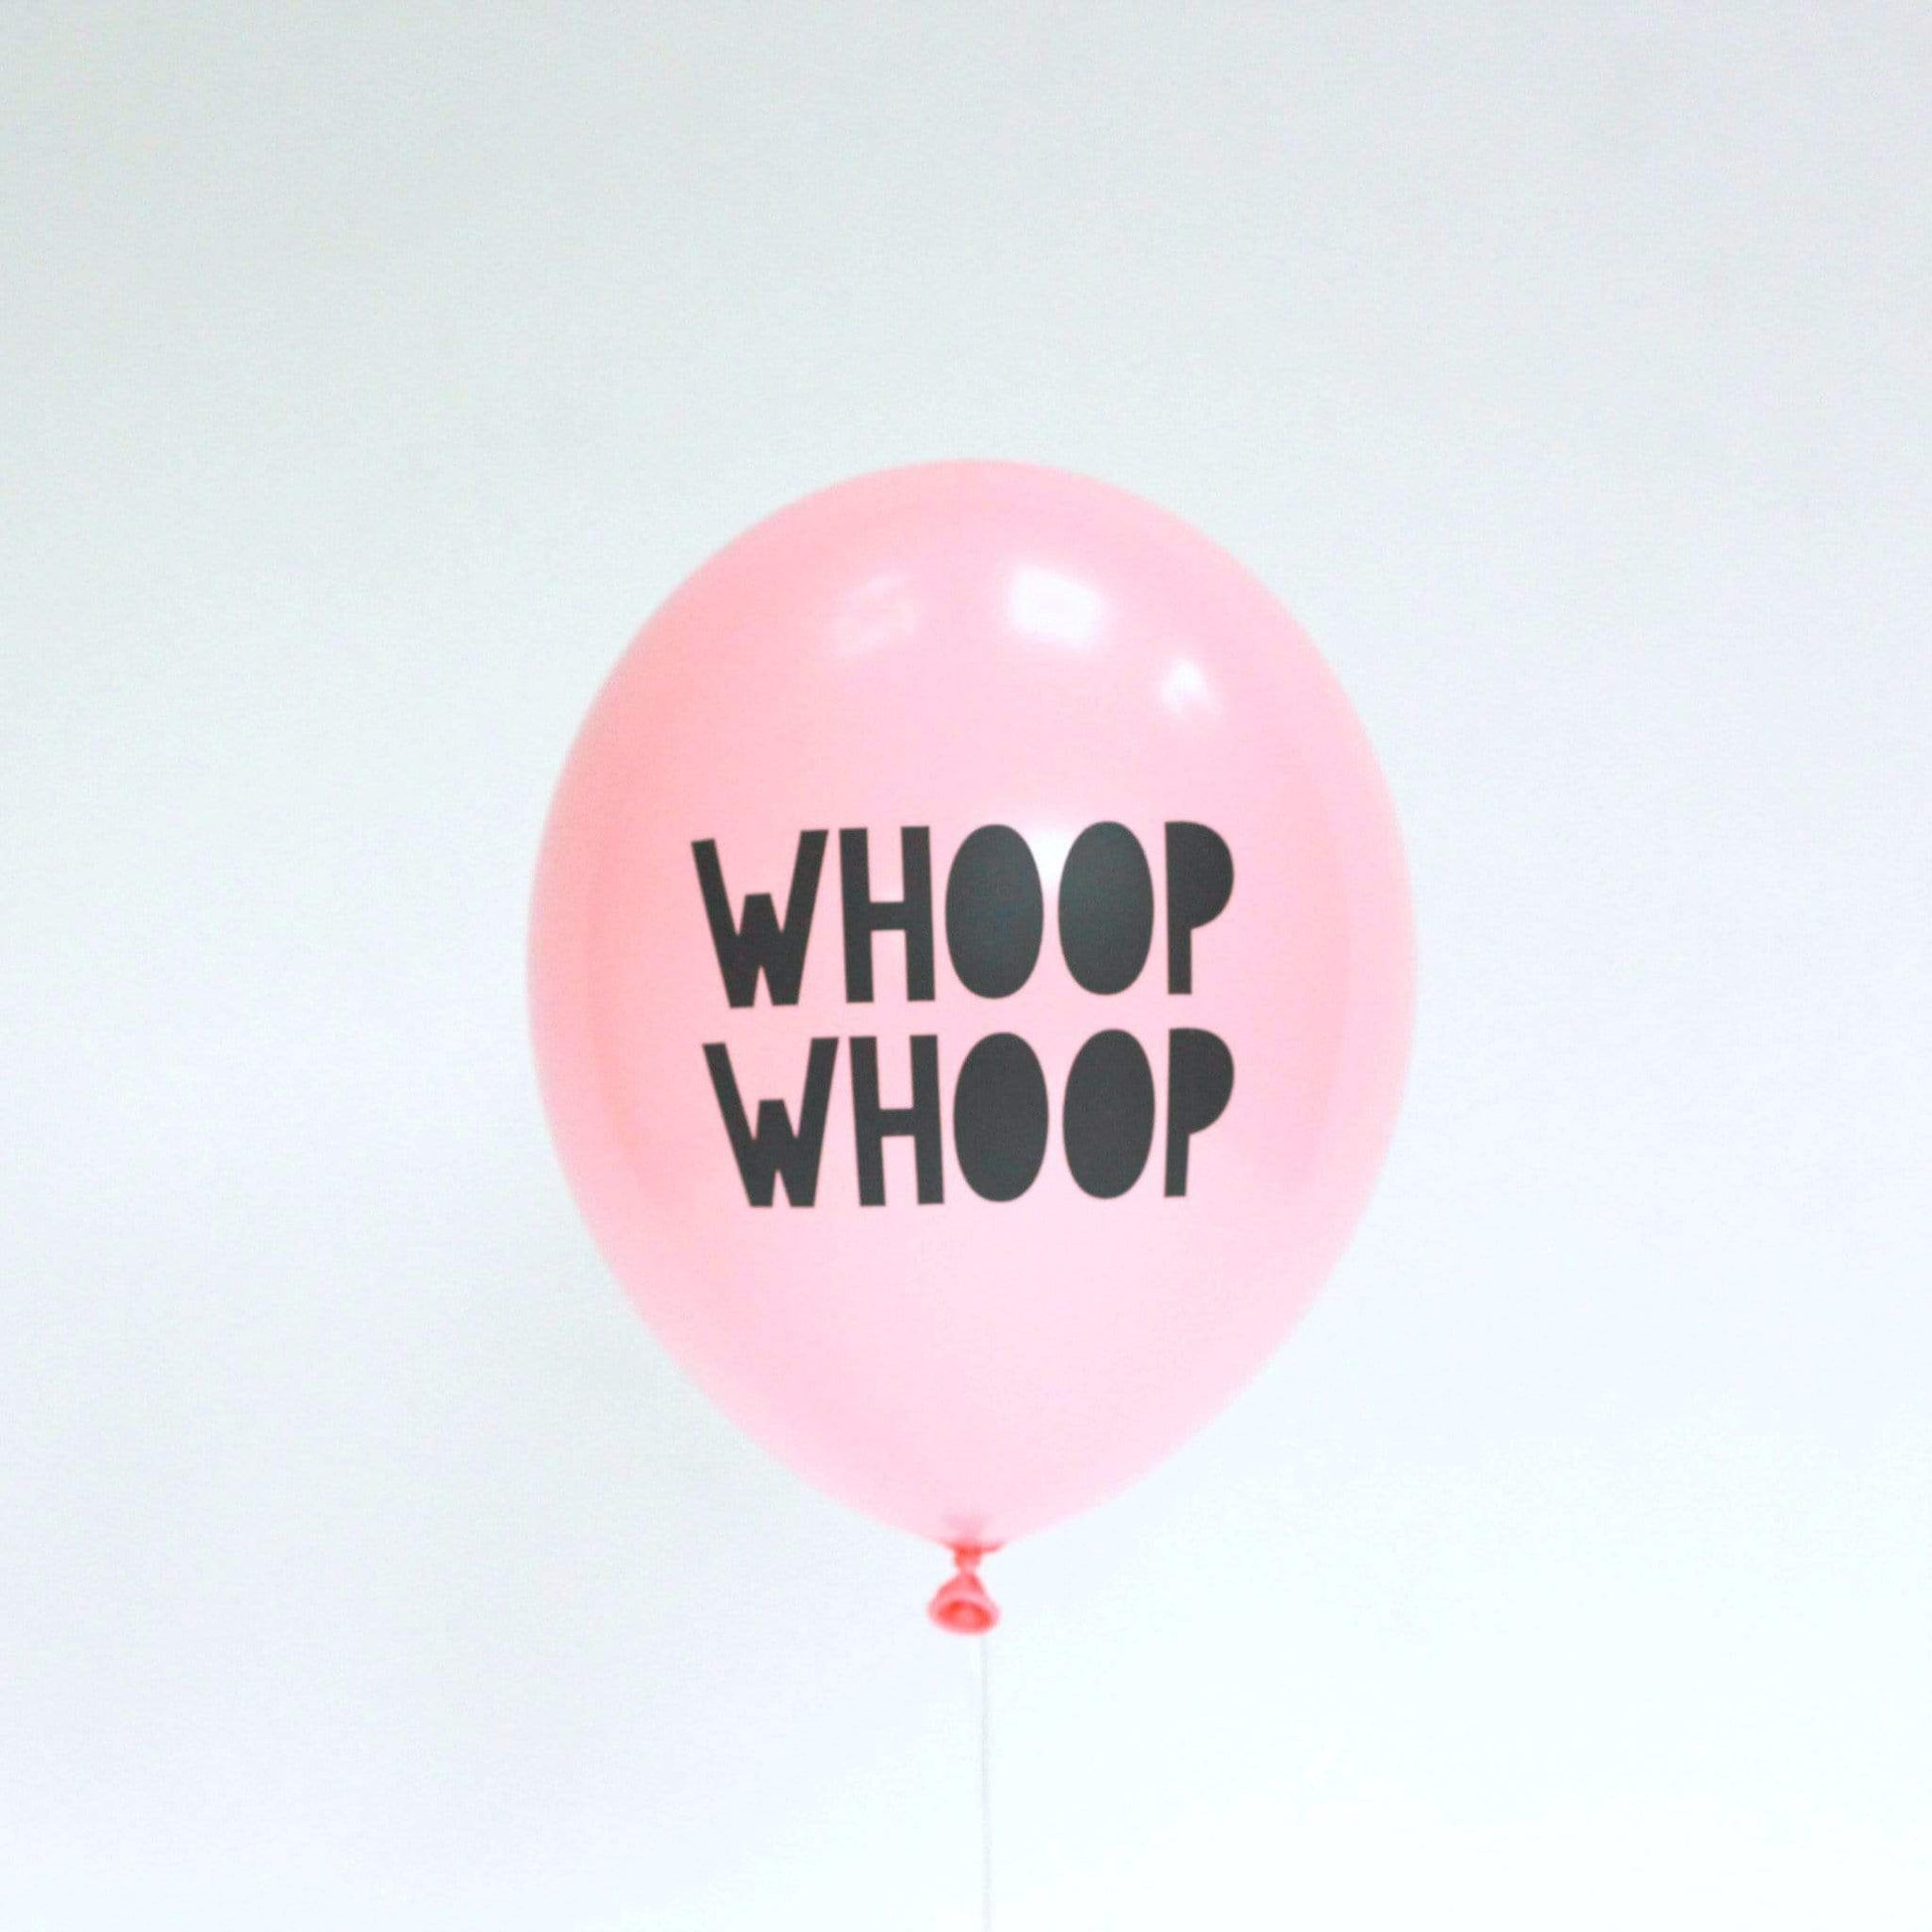 Whoop Whoop Balloons Pink | Modern Party Balloons | Online Balloonery Pretty Little Party Shop